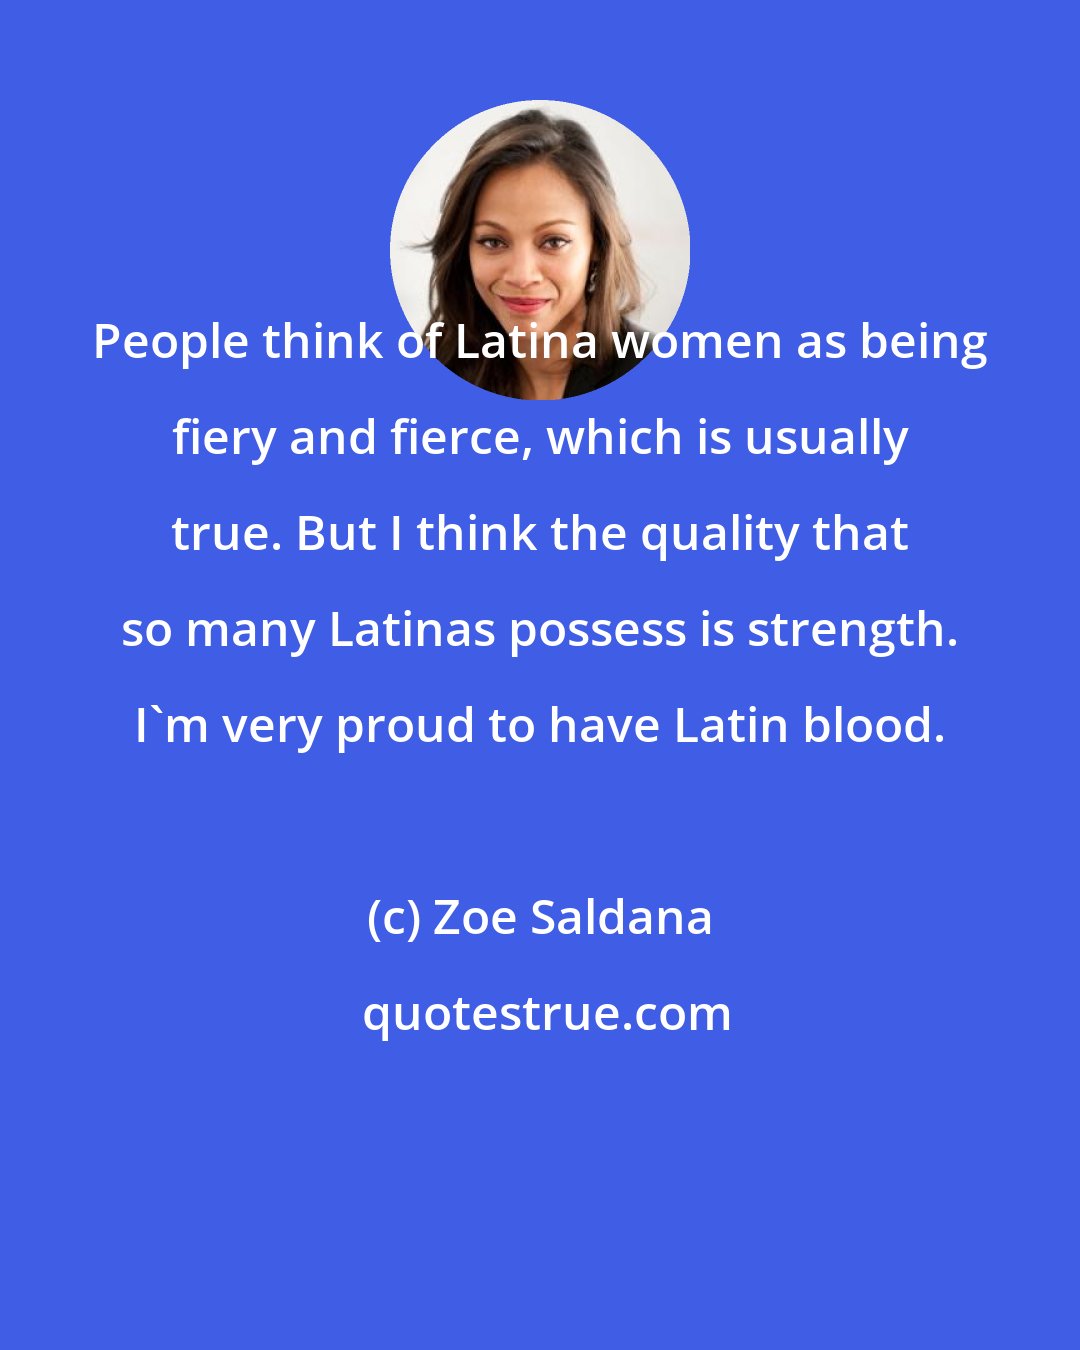 Zoe Saldana: People think of Latina women as being fiery and fierce, which is usually true. But I think the quality that so many Latinas possess is strength. I'm very proud to have Latin blood.